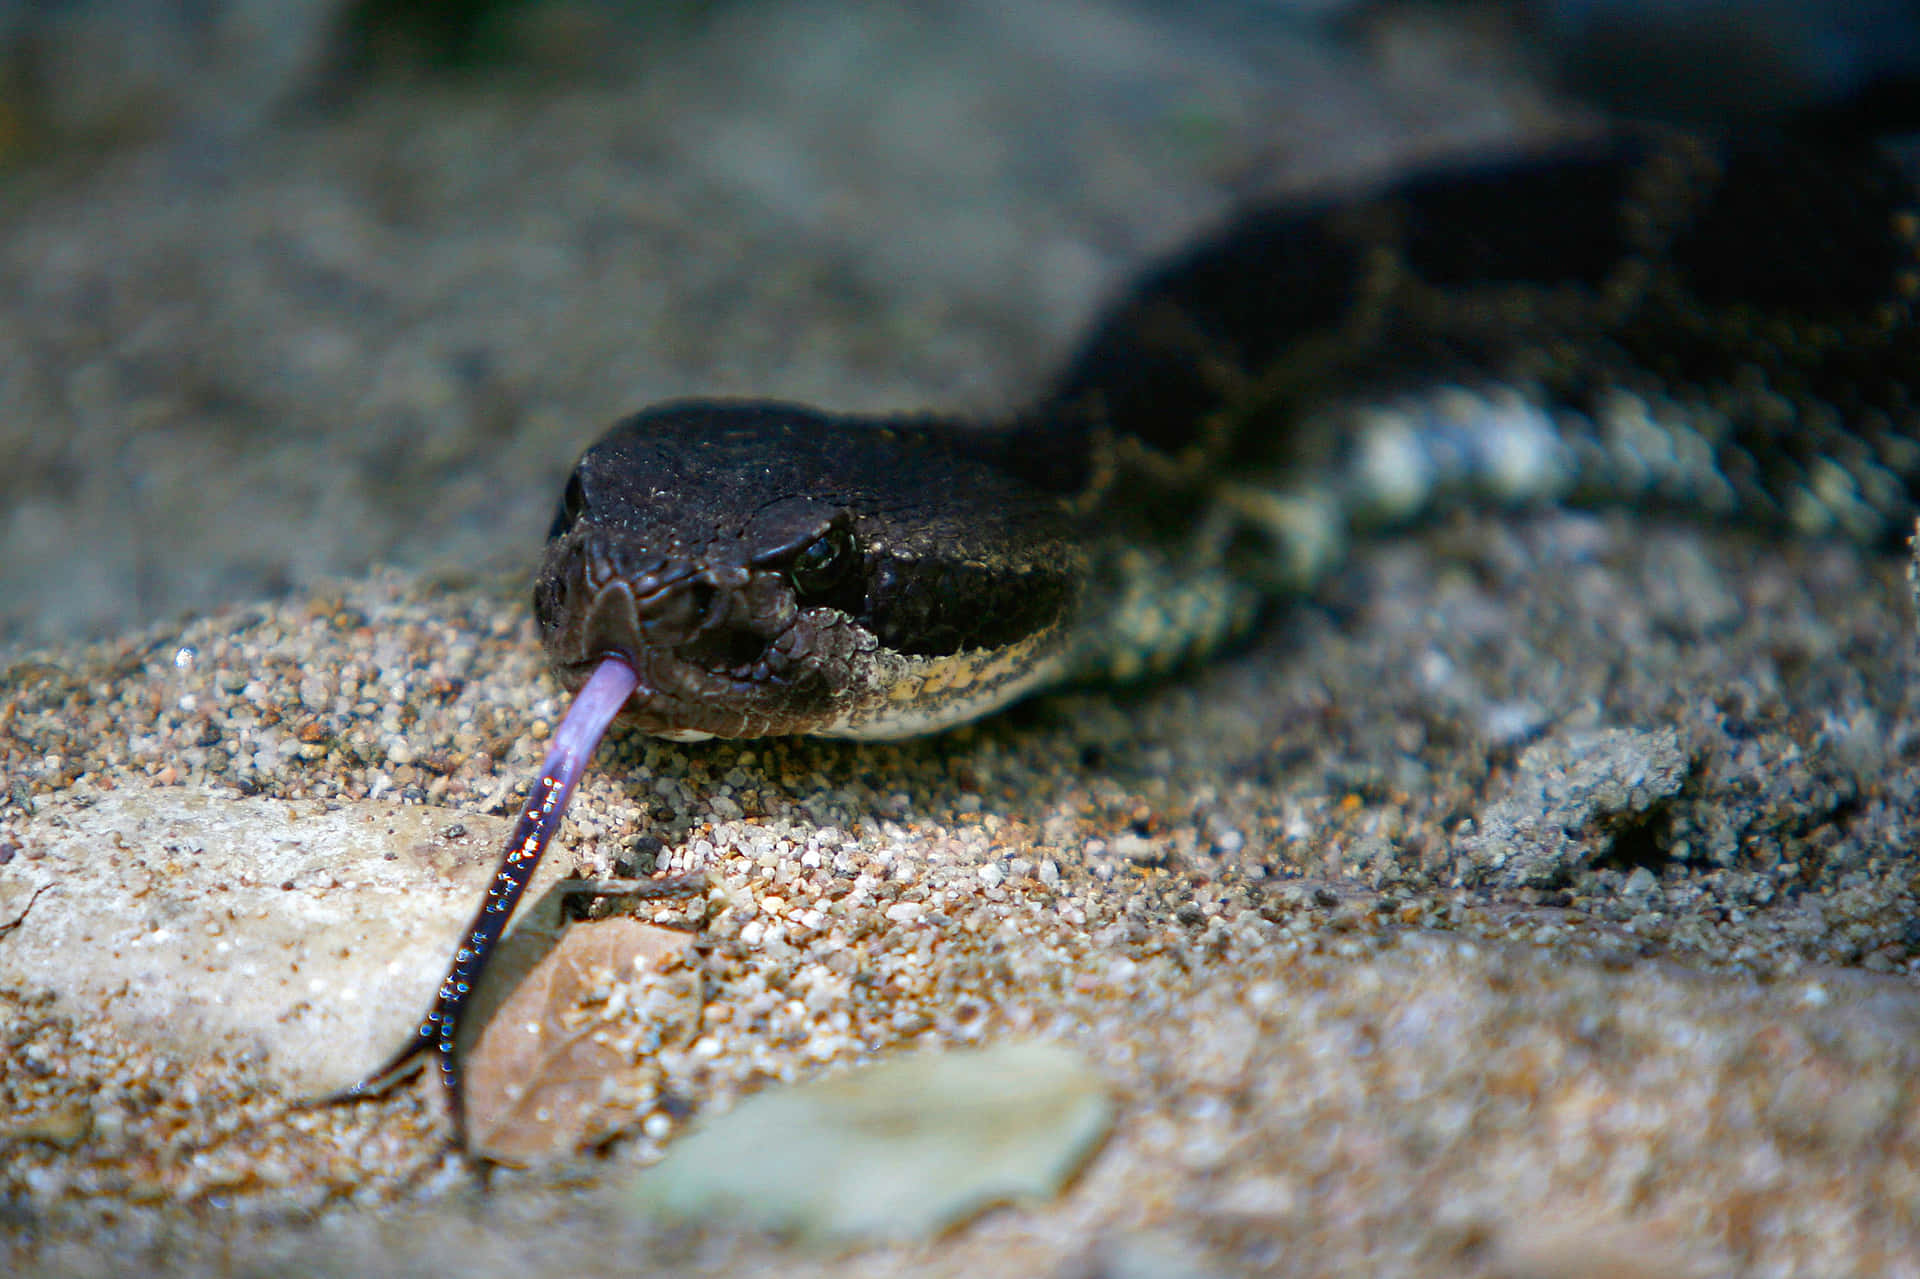 A Snake With A Black And White Body